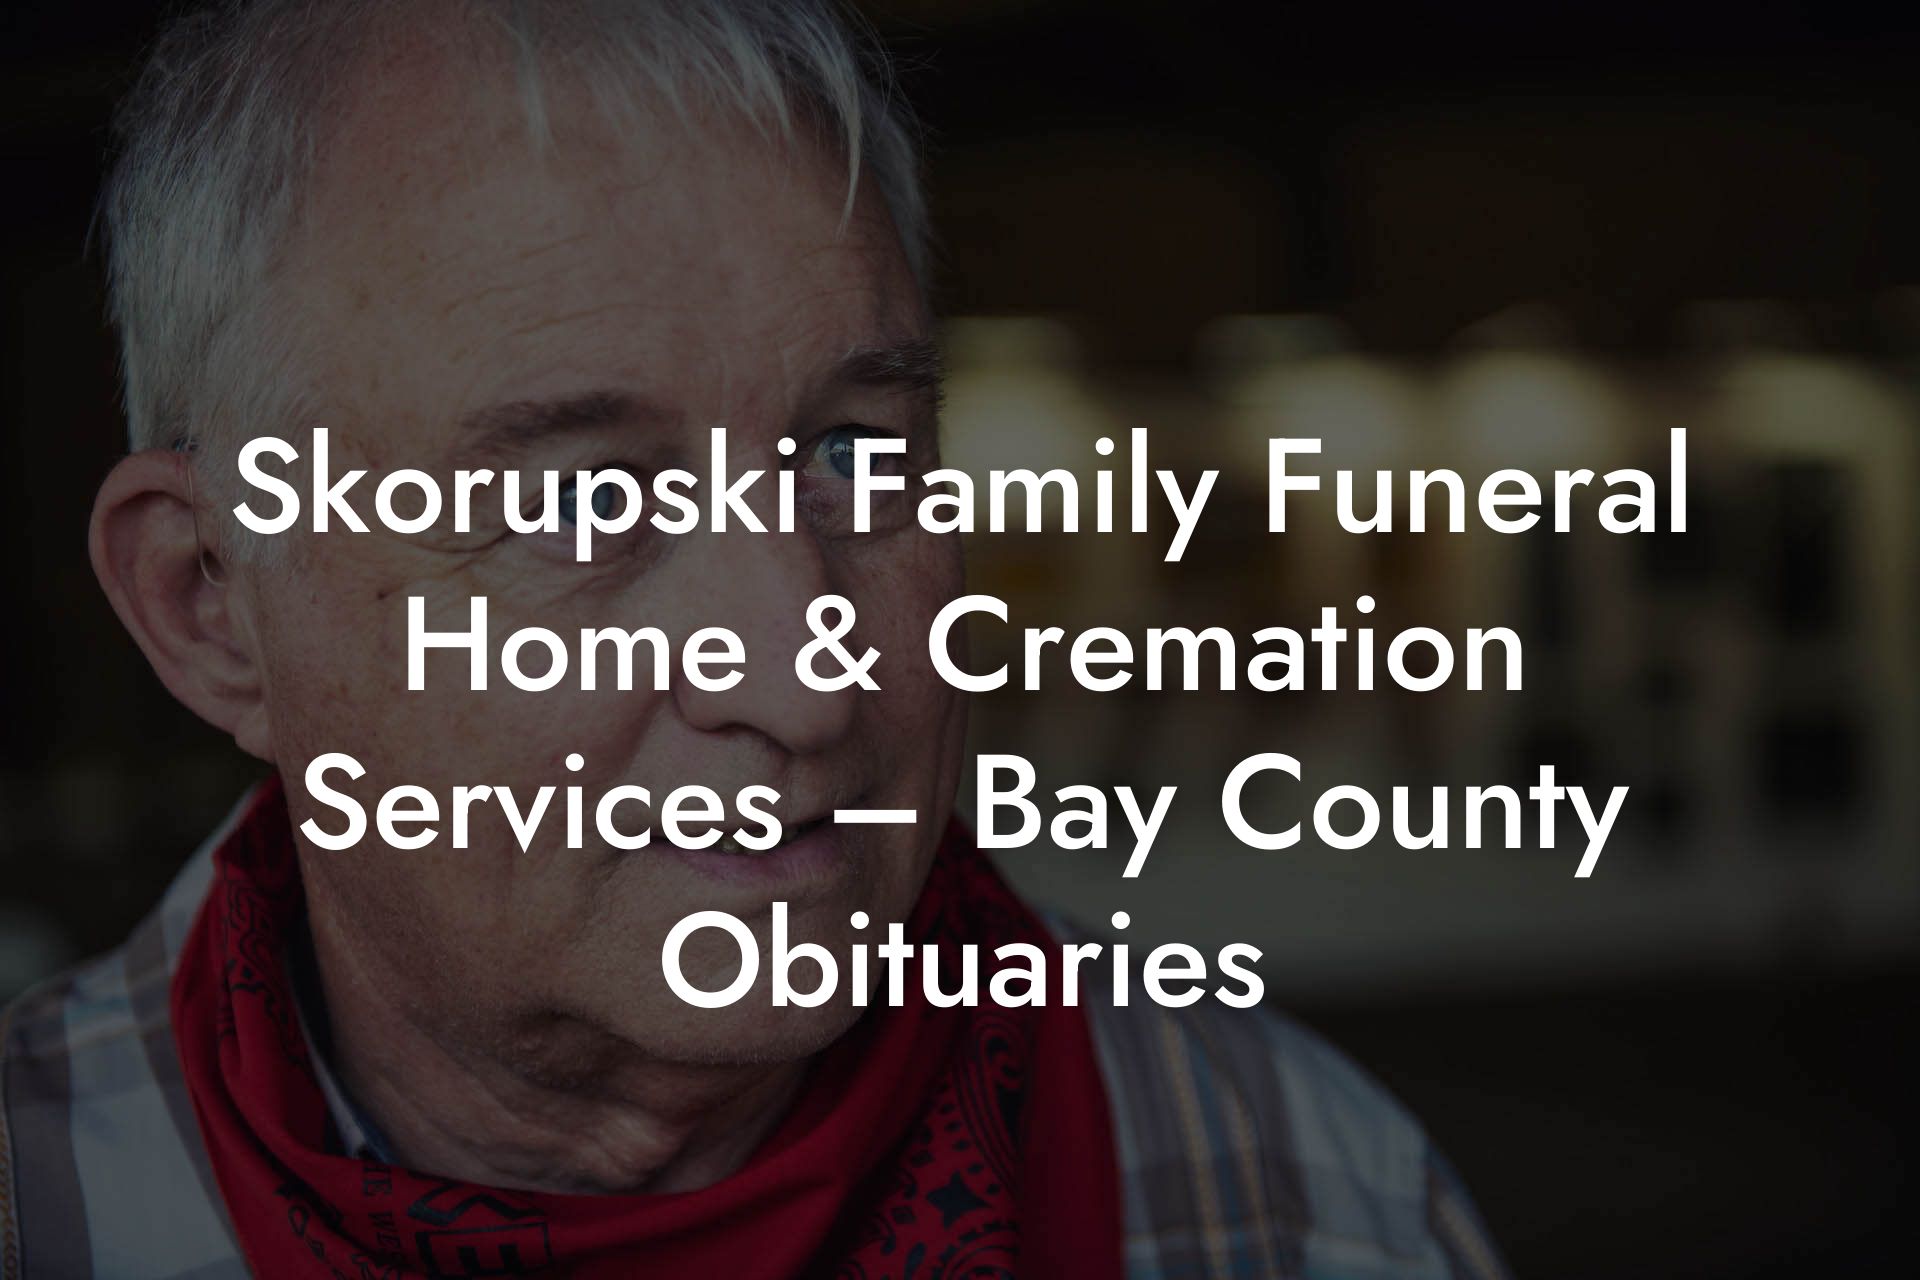 Skorupski Family Funeral Home & Cremation Services – Bay County Obituaries